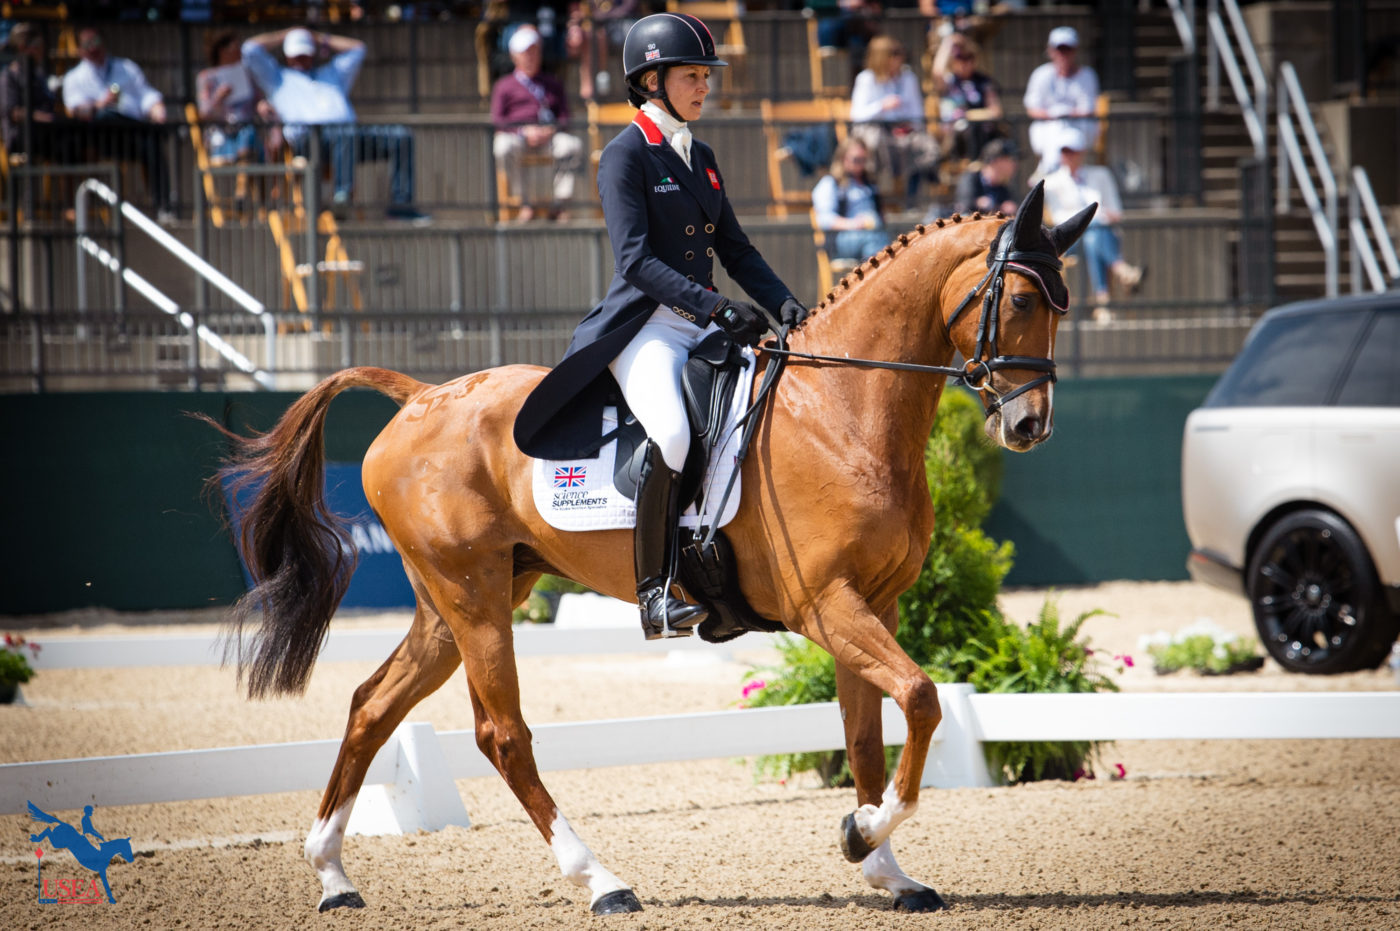 Sitting in second is Great Britain's Sarah Bullimore riding her homebred Corouet. USEA/Meagan DeLisle photo